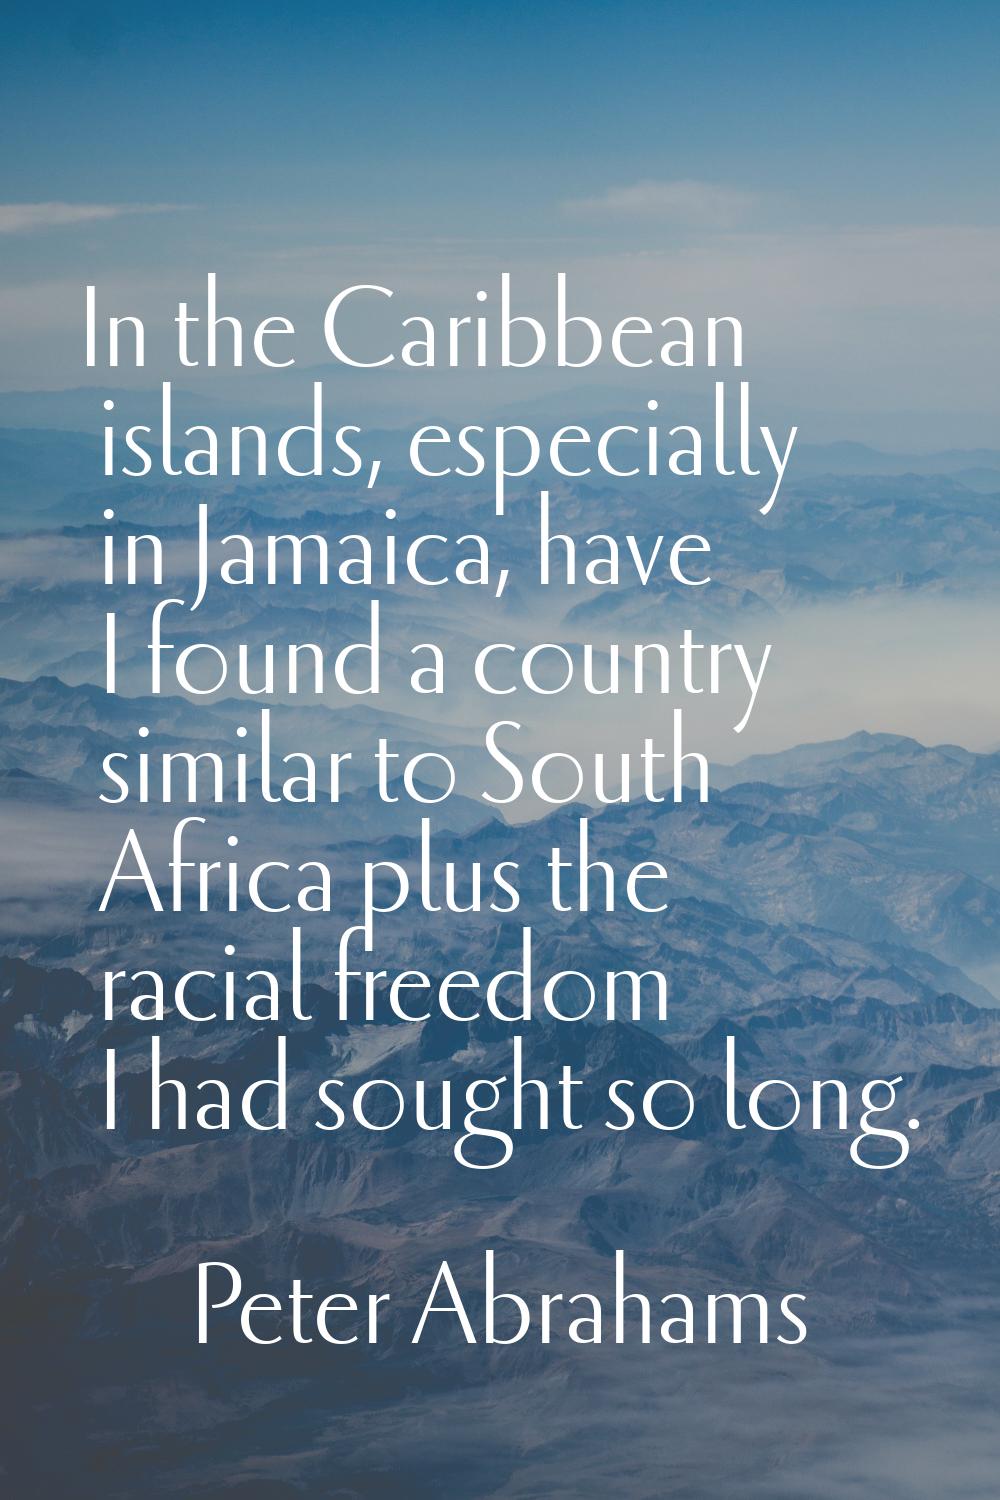 In the Caribbean islands, especially in Jamaica, have I found a country similar to South Africa plu